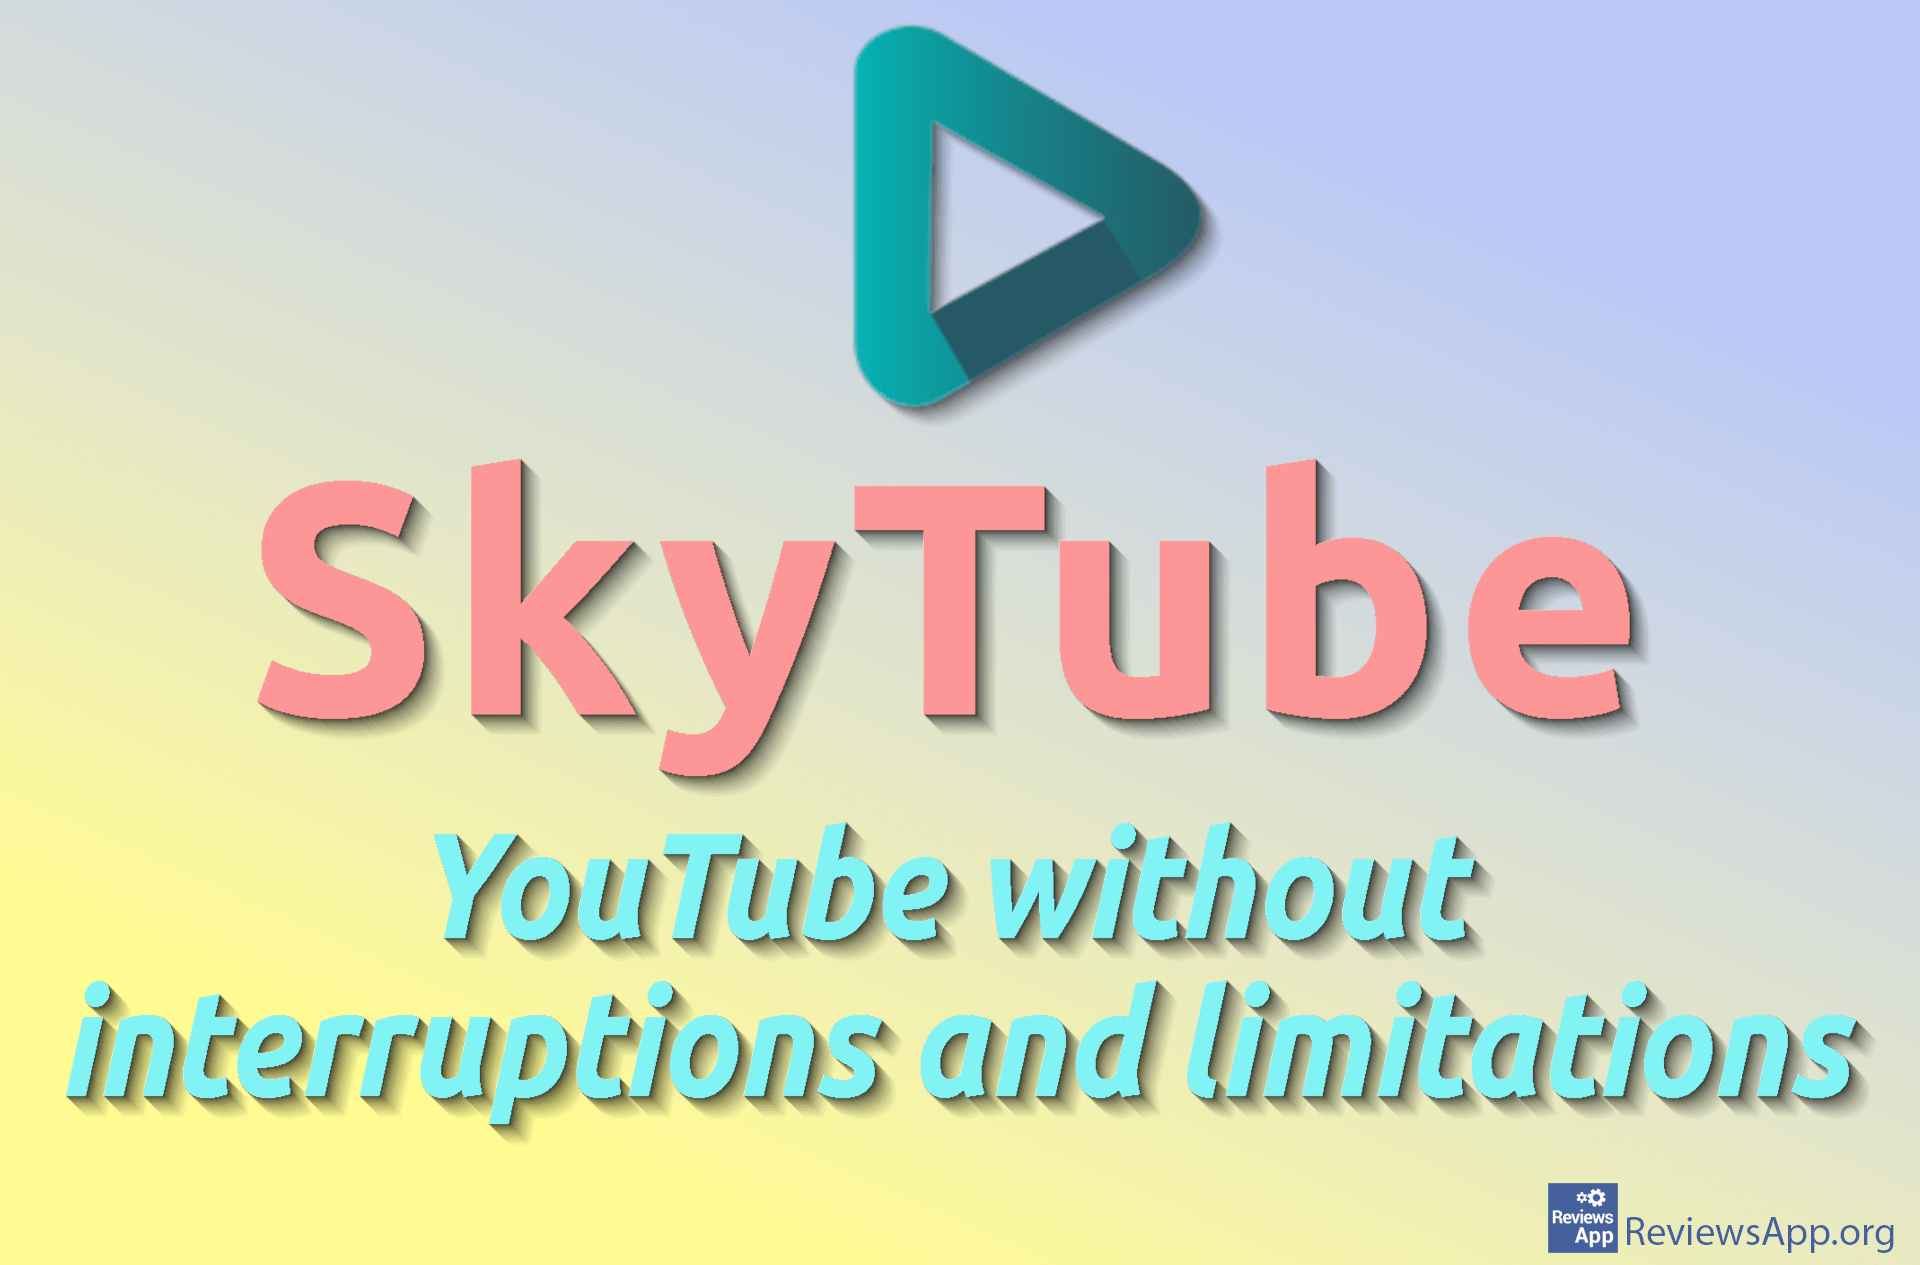 SkyTube – YouTube without interruptions and limitations